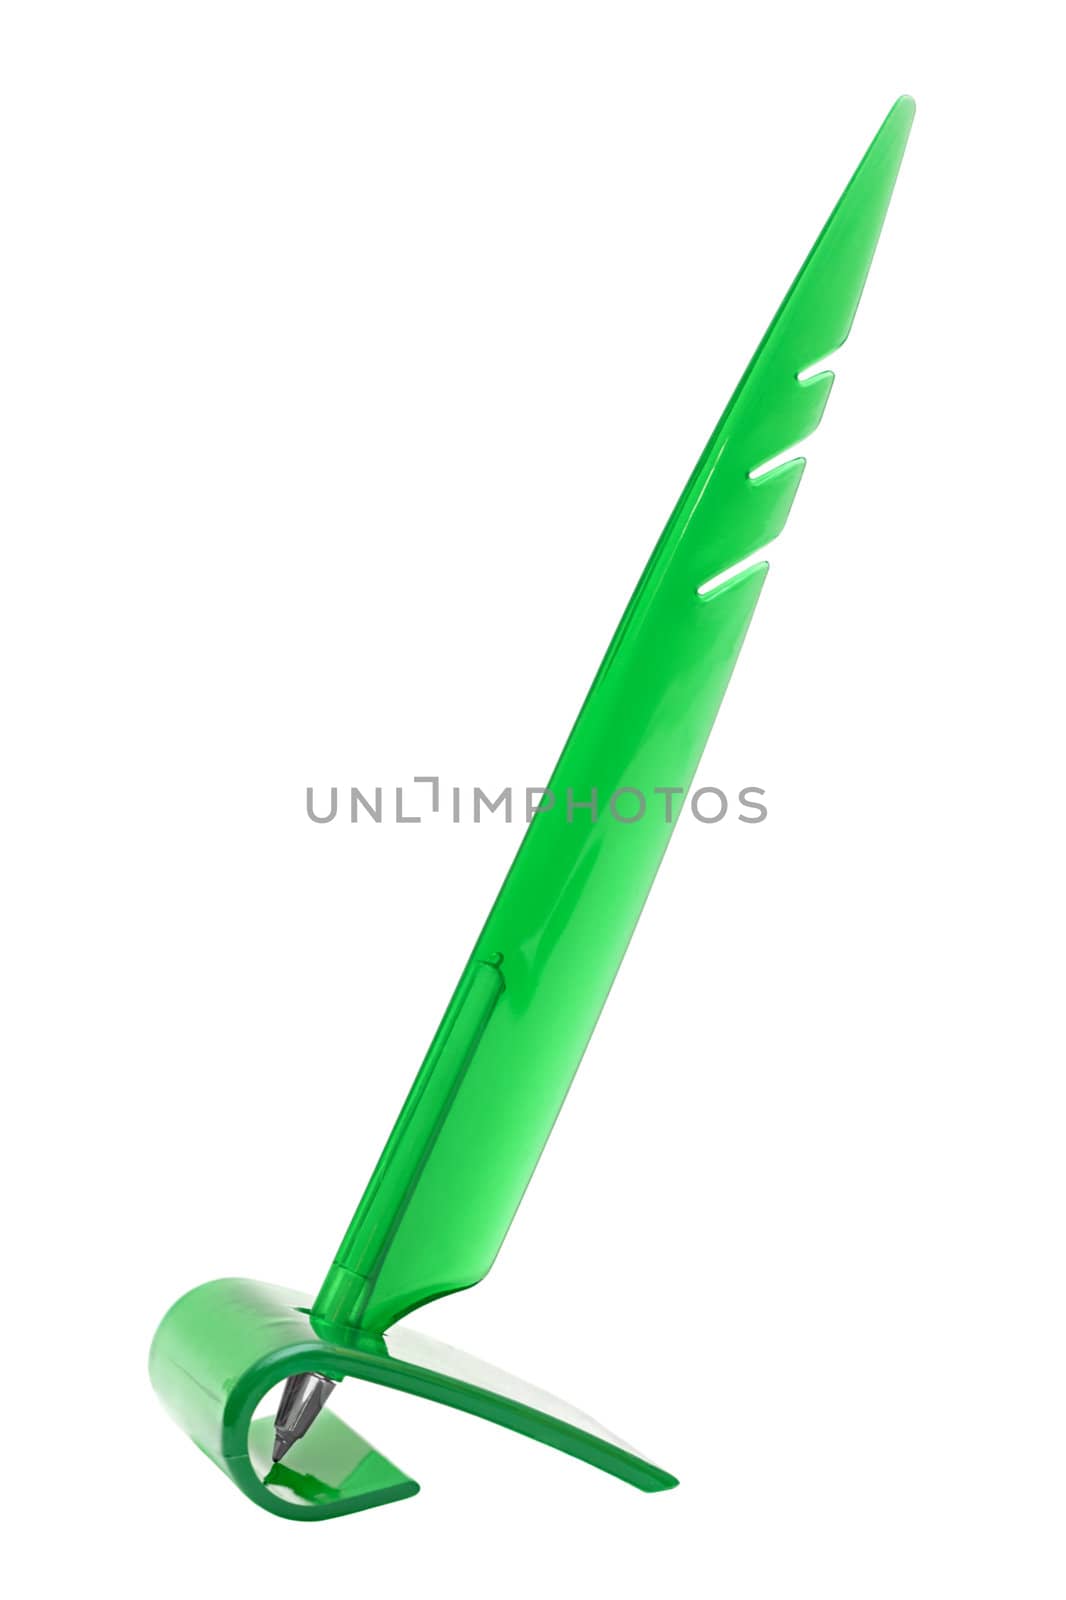 souvenir pen as a stylus on the stand isolated on a white background